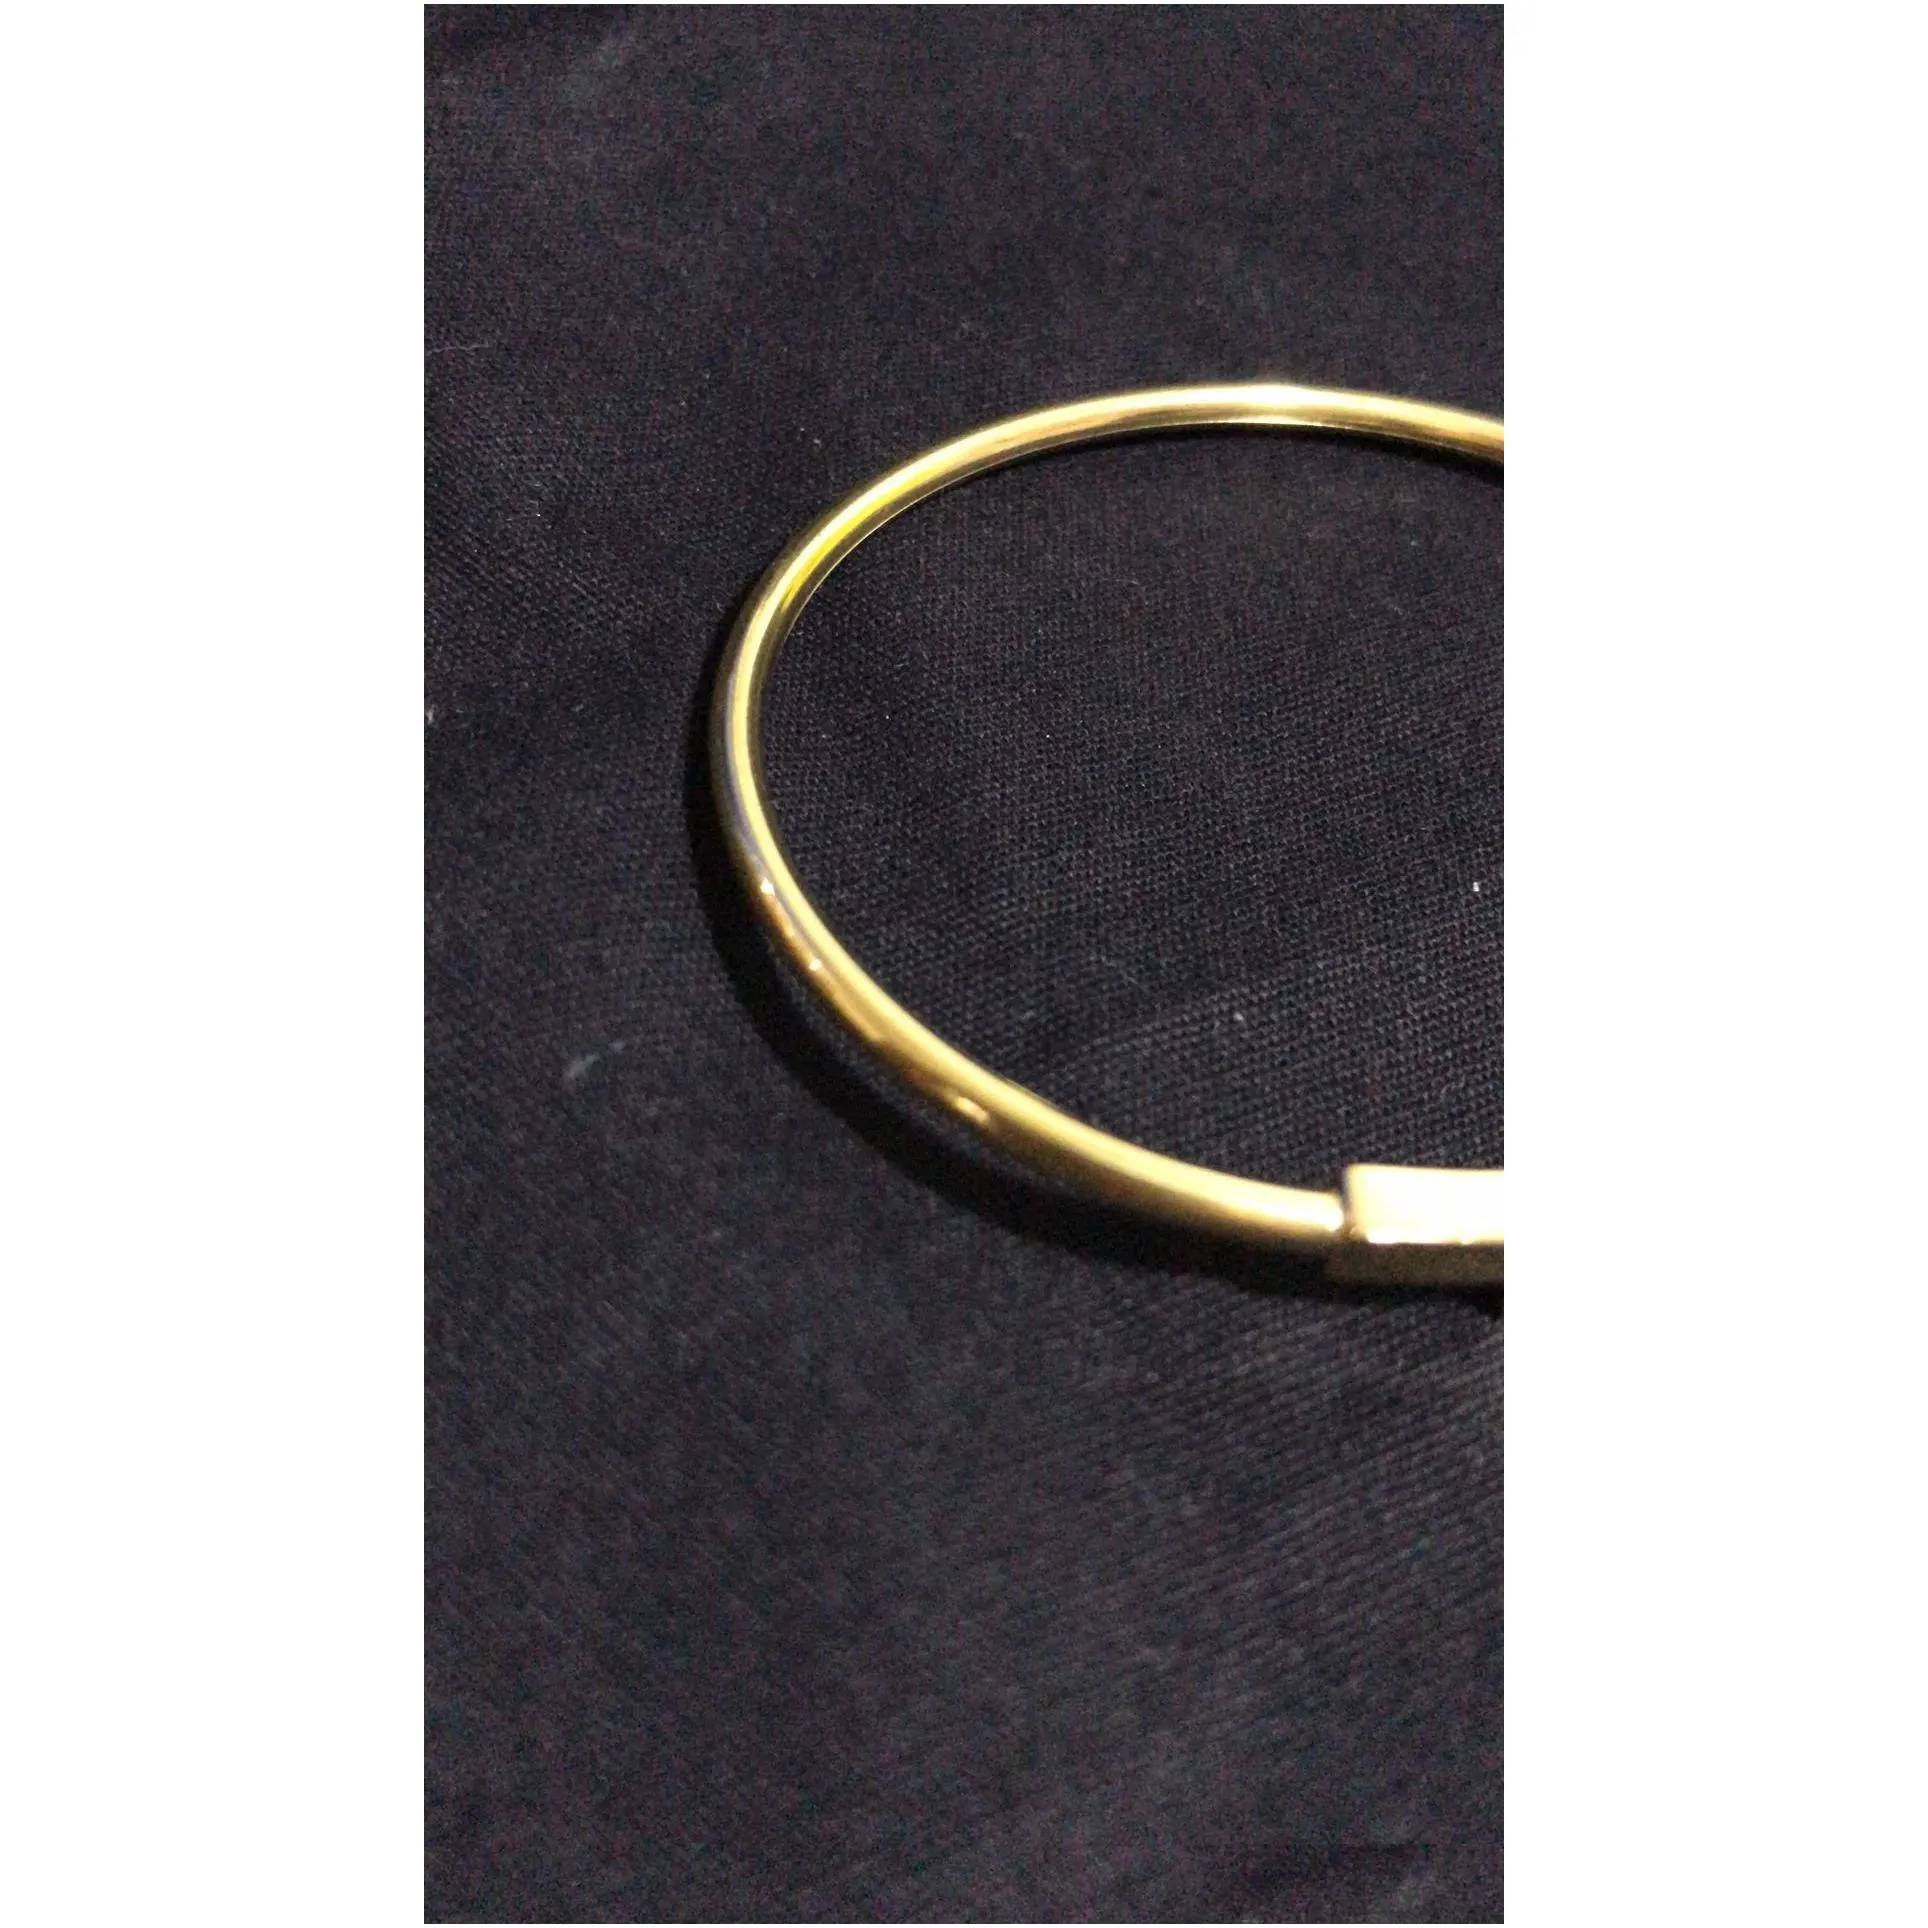 unique style love diamond wedding gold bangle for women and men bracelet lovely selected fashion charm tennis jewelry lovers gift